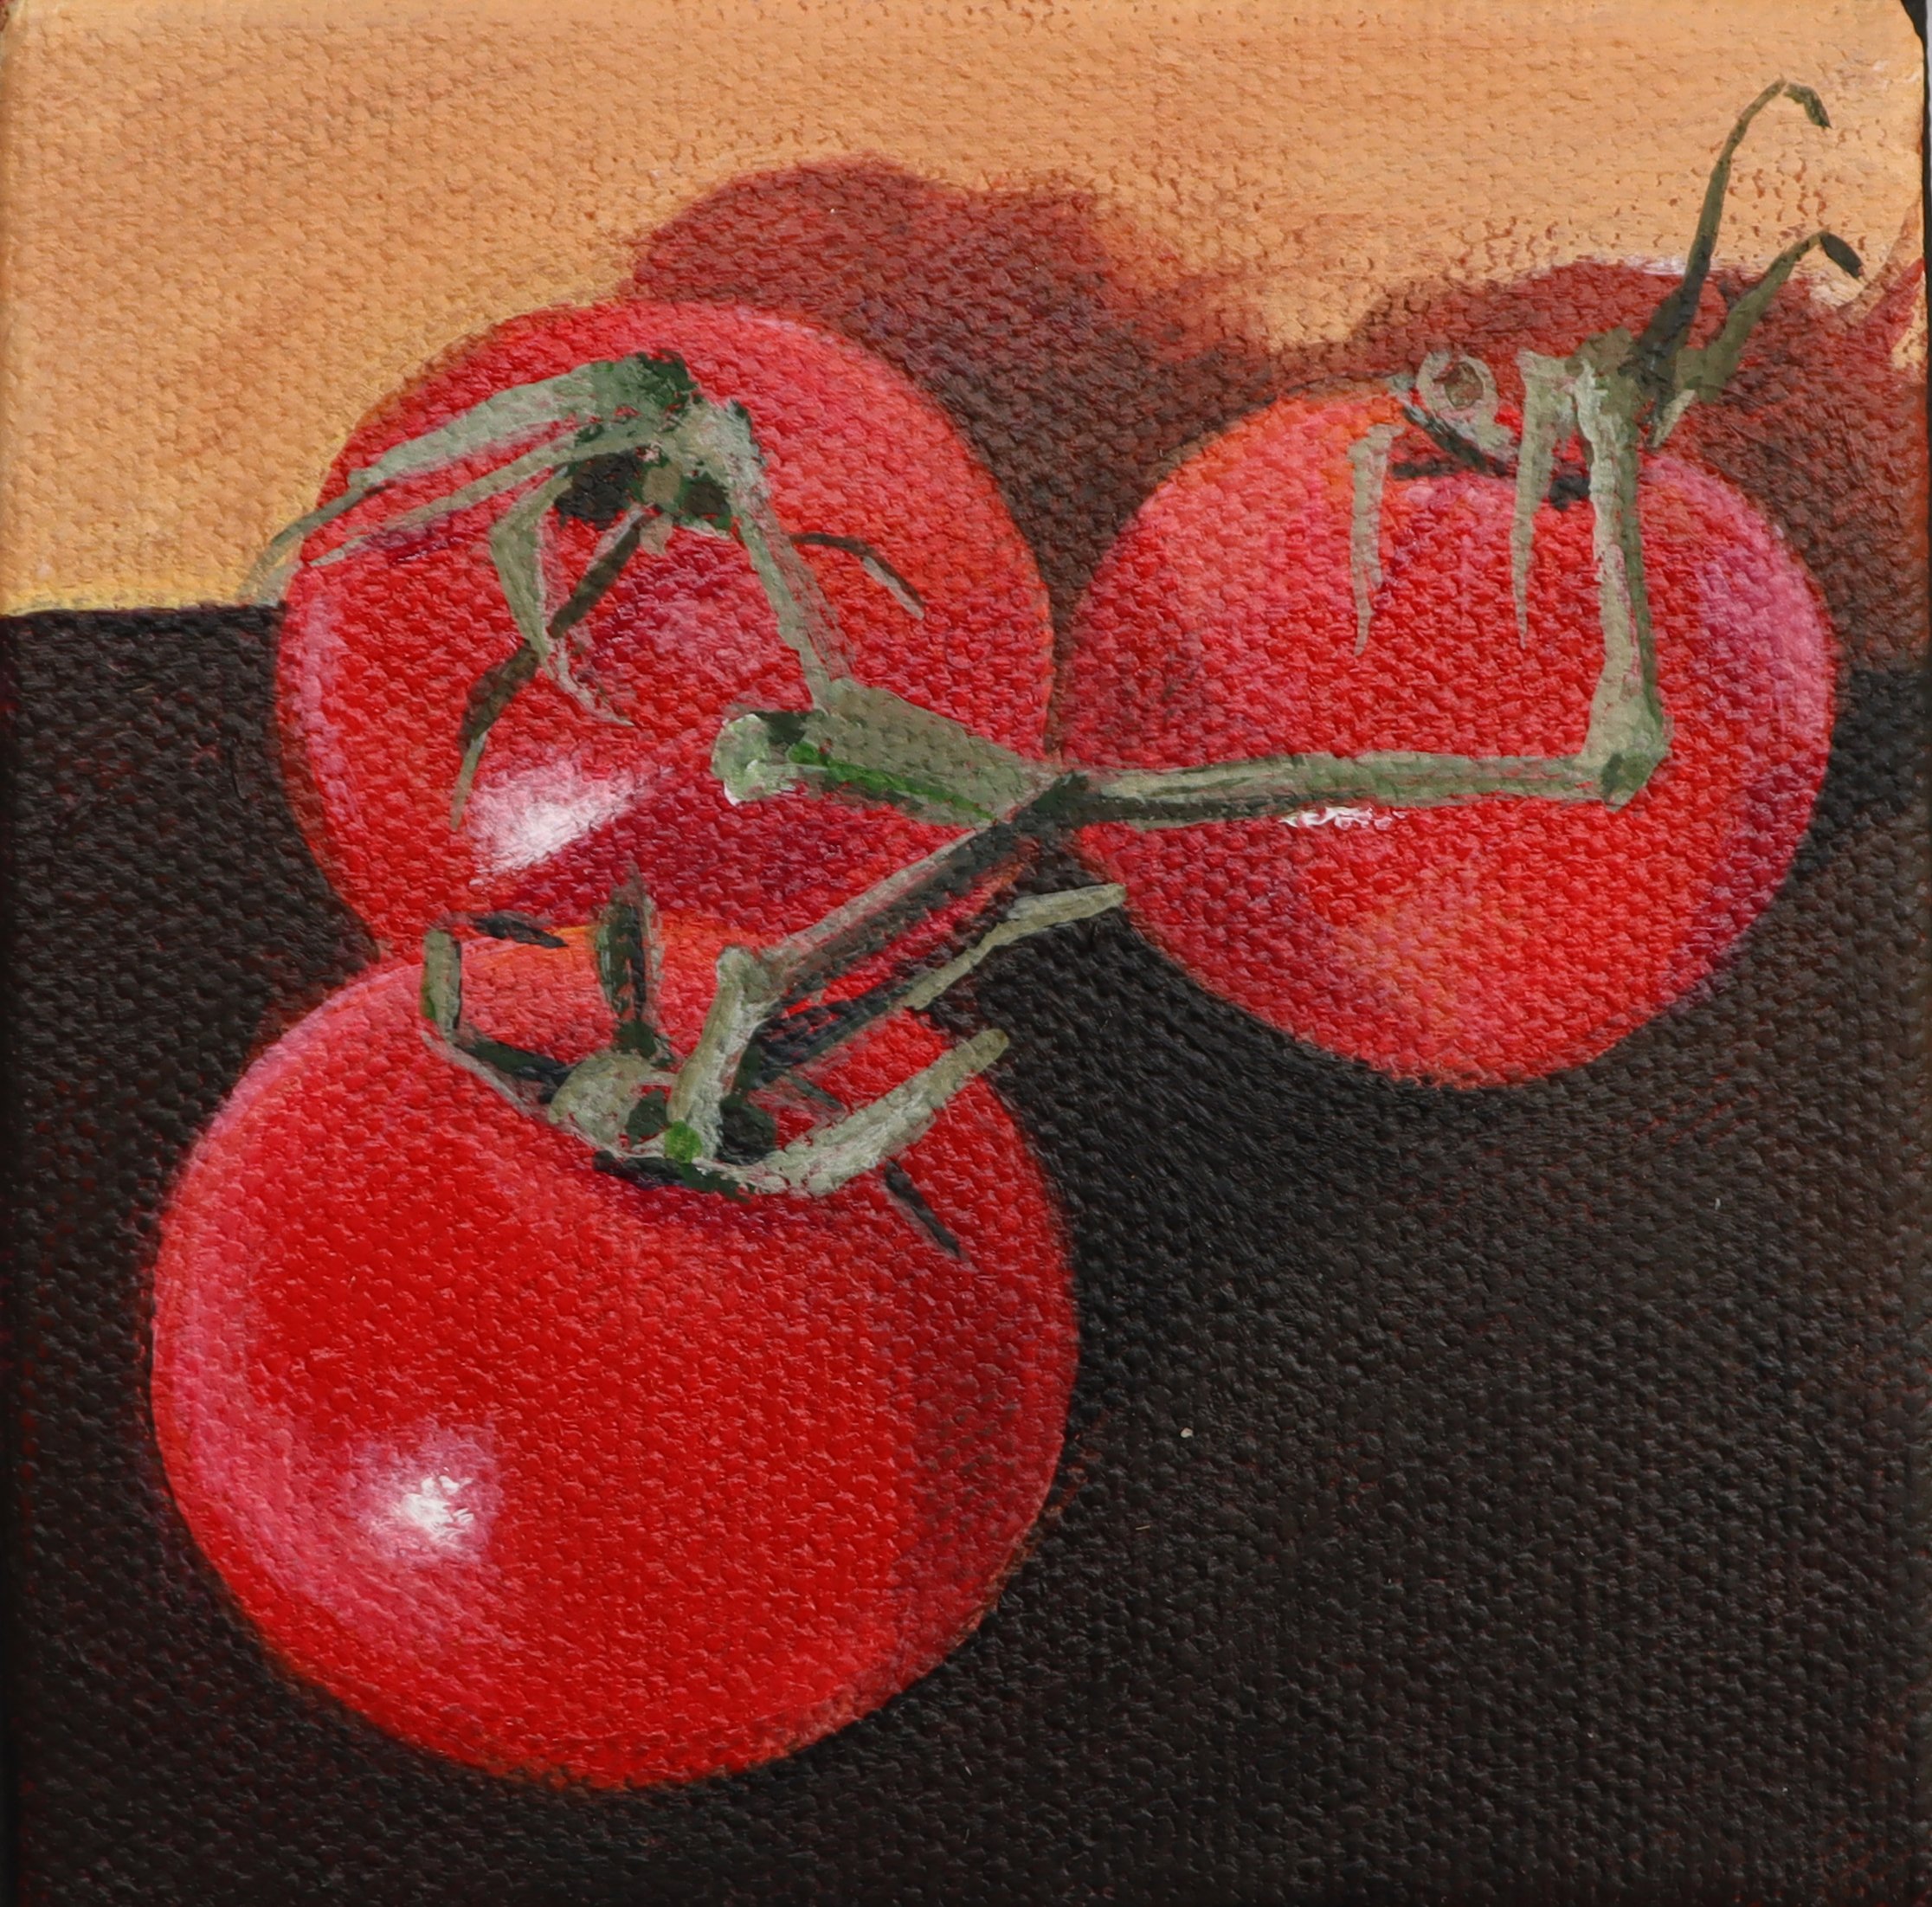 Tomatoes by Stephanie Langley